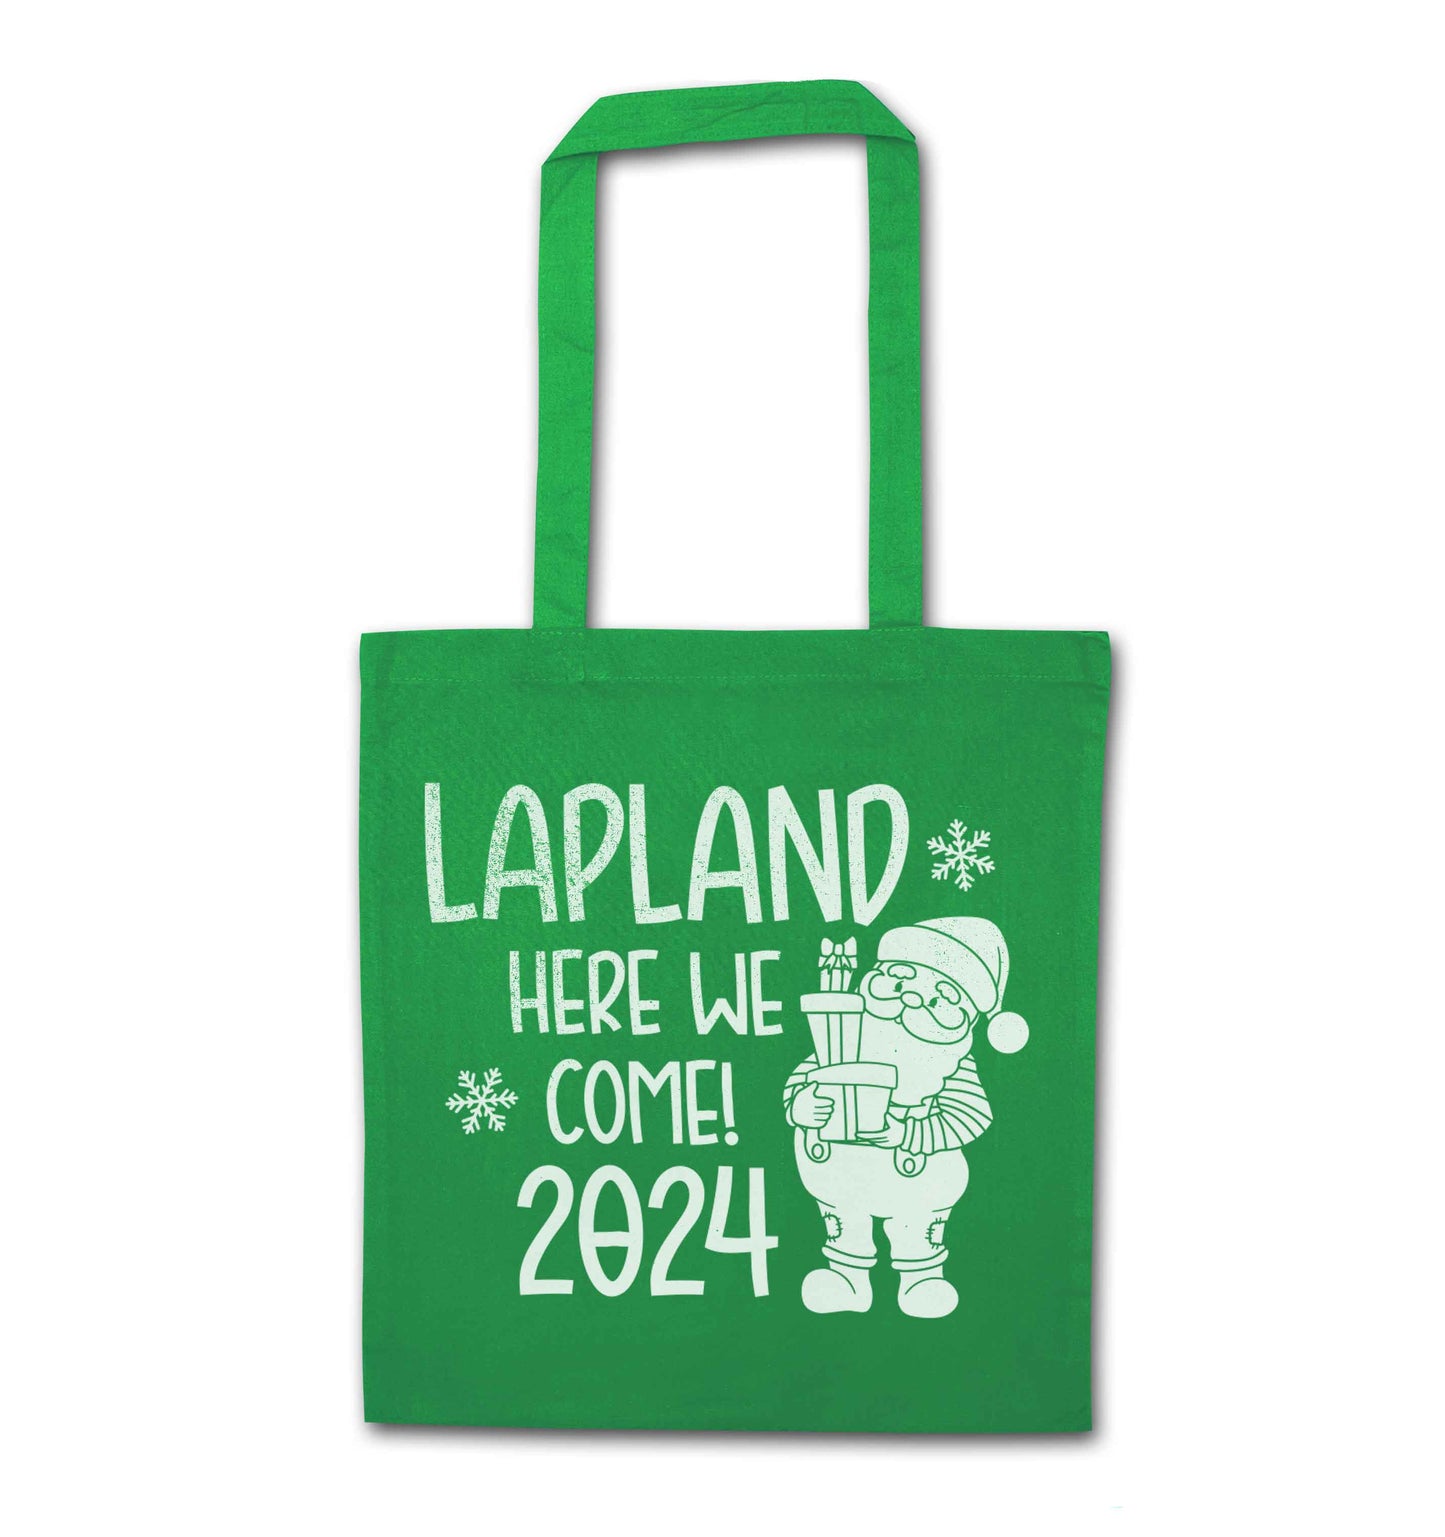 Lapland here we come green tote bag